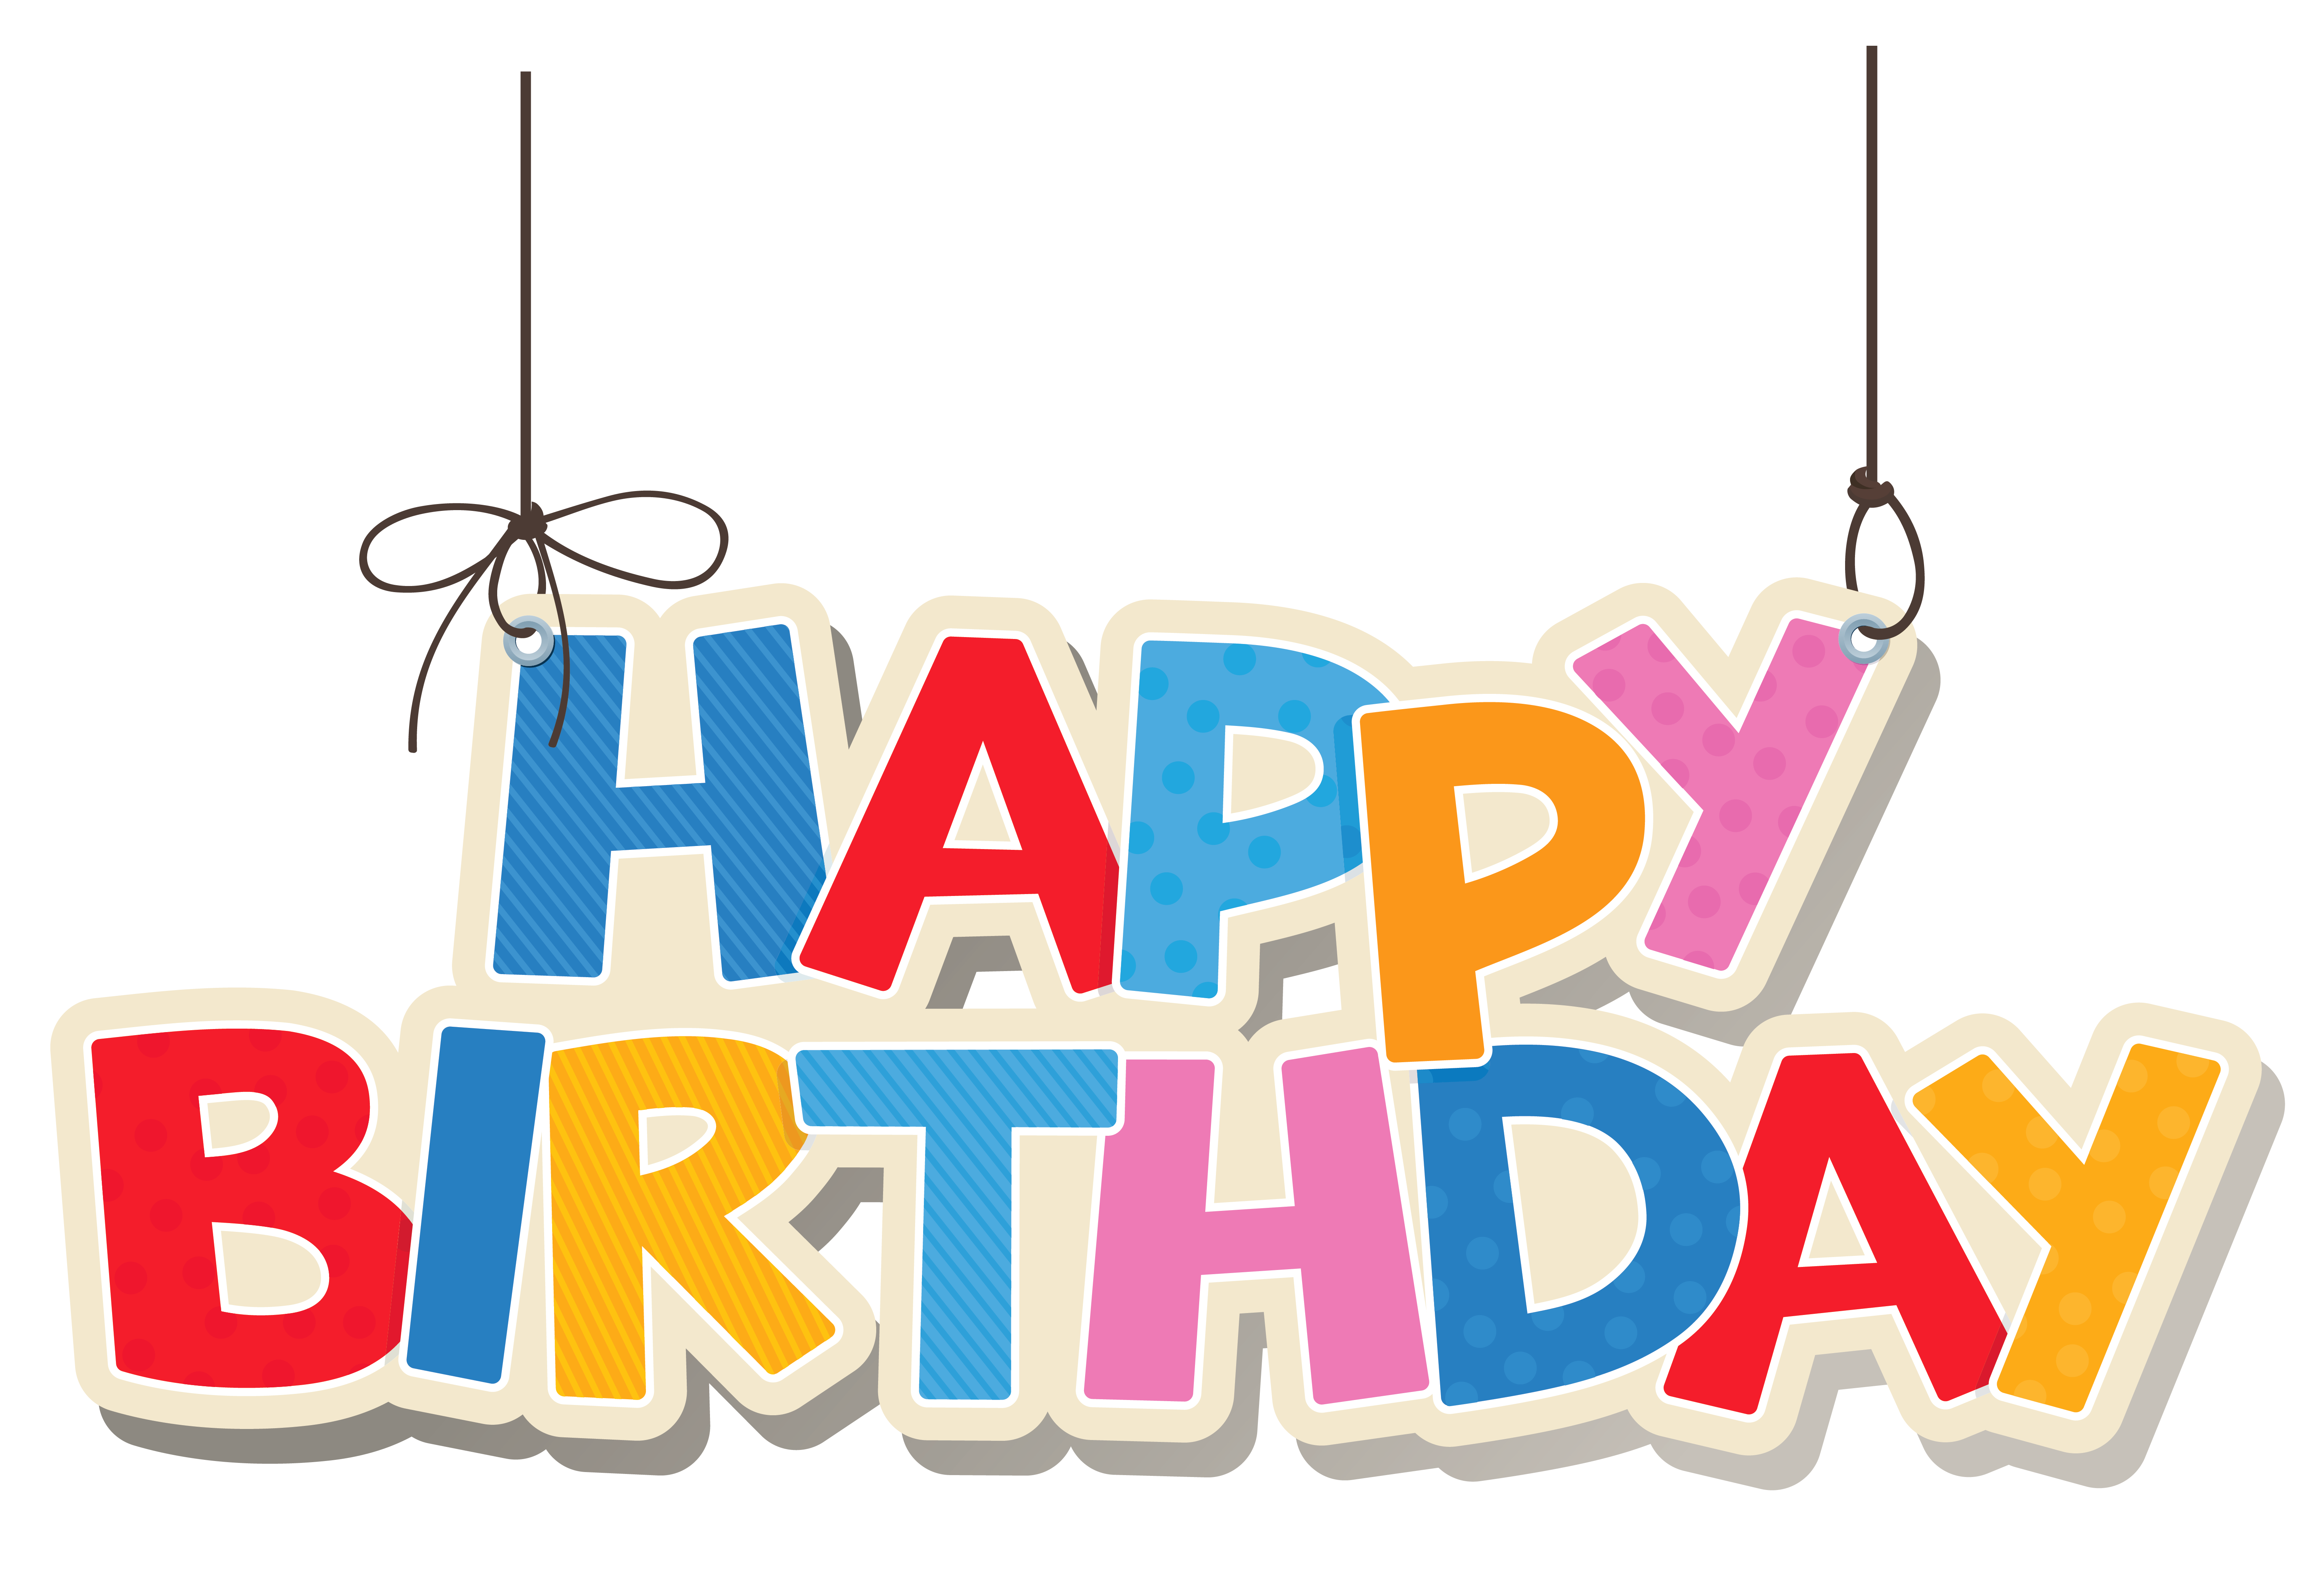 Free PNG Download: Happy Birthday Decorative Image